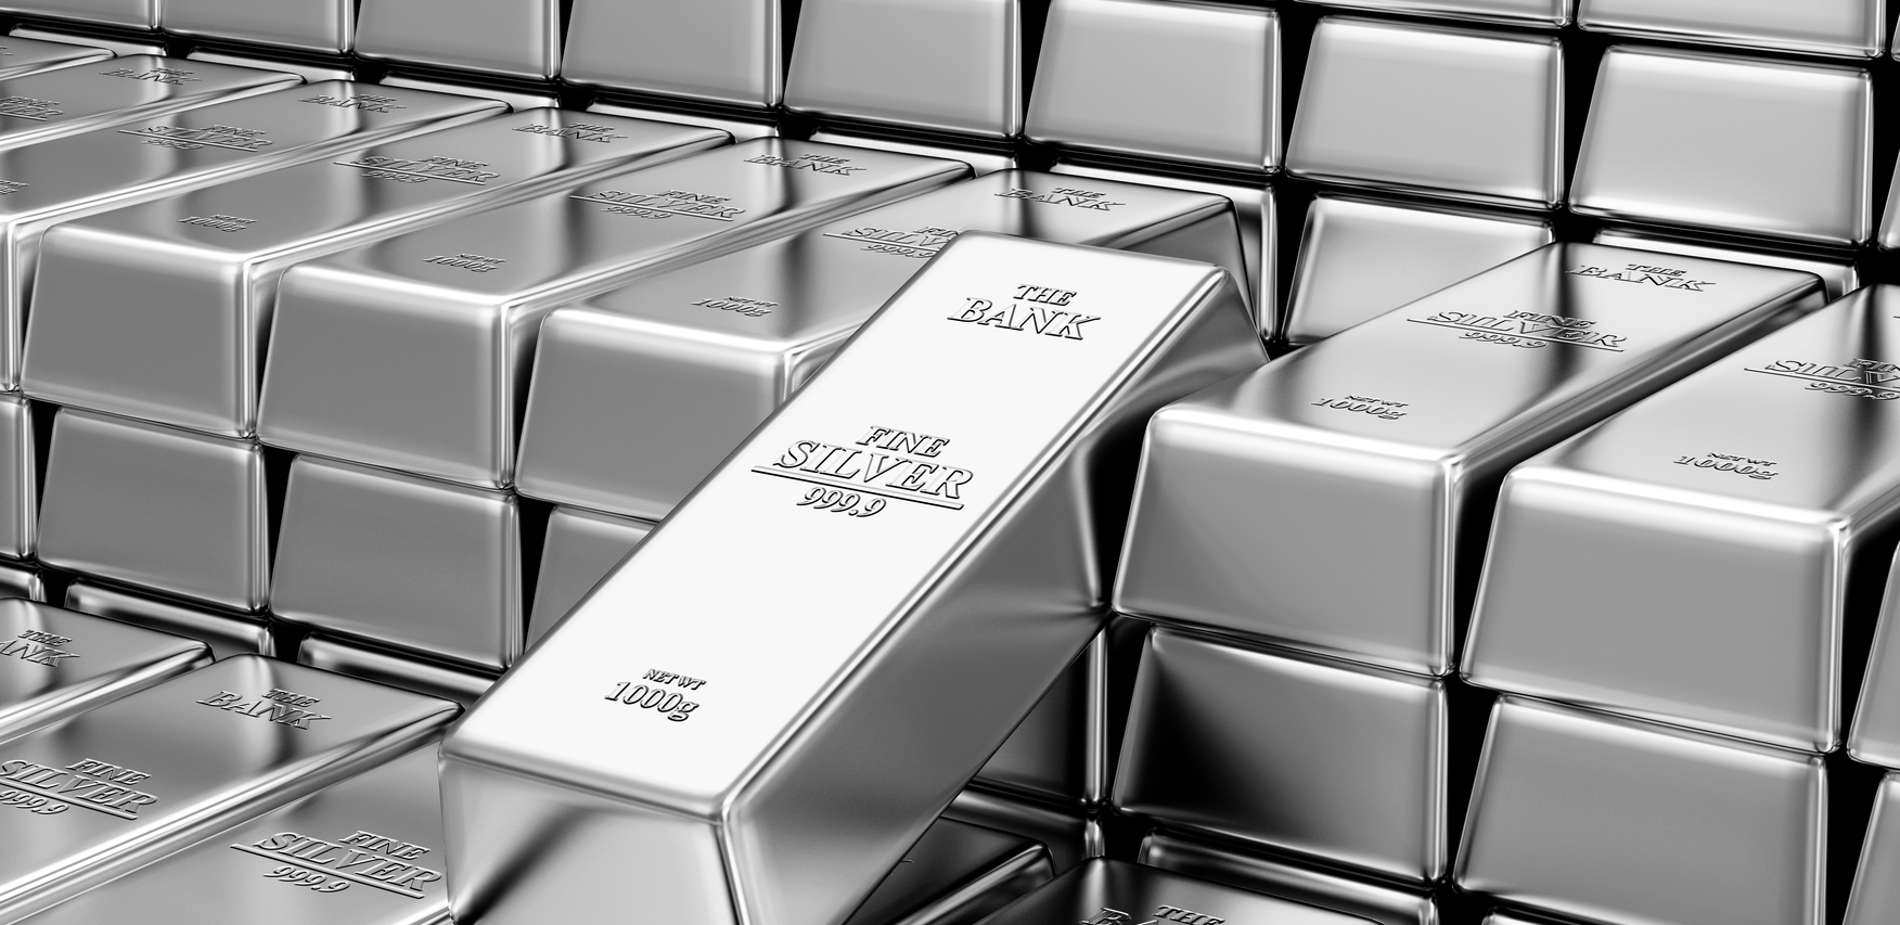 Where can you find the price of 1 ounce of silver?